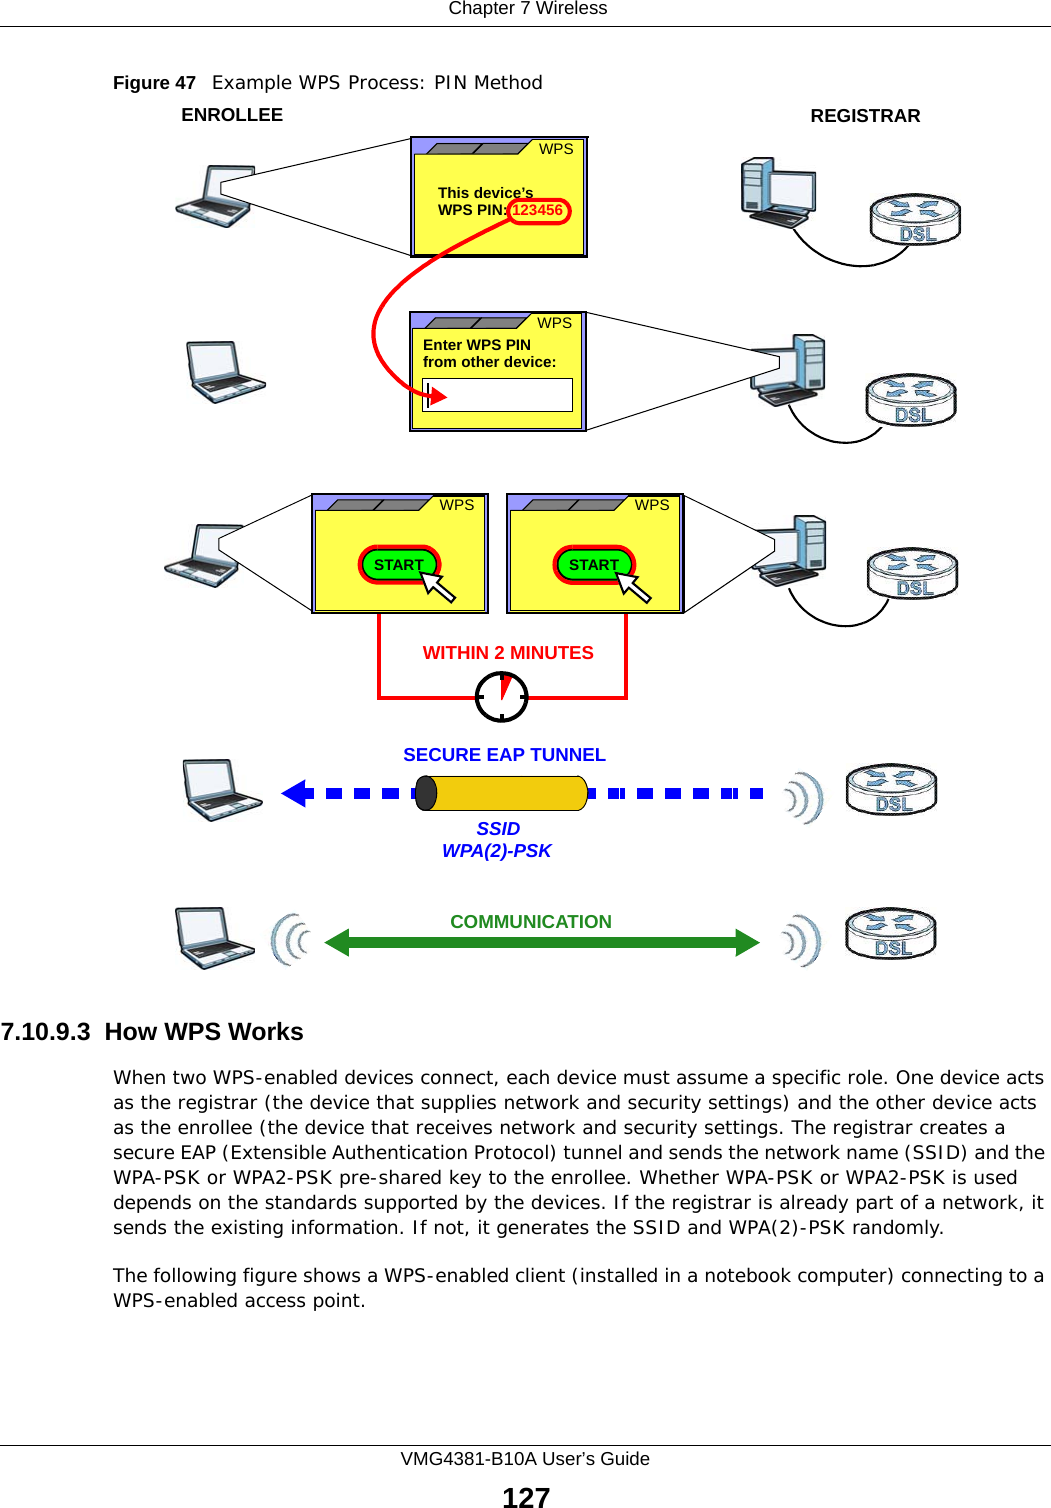  Chapter 7 WirelessVMG4381-B10A User’s Guide127Figure 47   Example WPS Process: PIN Method7.10.9.3  How WPS WorksWhen two WPS-enabled devices connect, each device must assume a specific role. One device acts as the registrar (the device that supplies network and security settings) and the other device acts as the enrollee (the device that receives network and security settings. The registrar creates a secure EAP (Extensible Authentication Protocol) tunnel and sends the network name (SSID) and the WPA-PSK or WPA2-PSK pre-shared key to the enrollee. Whether WPA-PSK or WPA2-PSK is used depends on the standards supported by the devices. If the registrar is already part of a network, it sends the existing information. If not, it generates the SSID and WPA(2)-PSK randomly.The following figure shows a WPS-enabled client (installed in a notebook computer) connecting to a WPS-enabled access point.ENROLLEESECURE EAP TUNNELSSIDWPA(2)-PSKWITHIN 2 MINUTESCOMMUNICATIONThis device’s WPSEnter WPS PIN  WPSfrom other device: WPS PIN: 123456WPSSTARTWPSSTARTREGISTRAR